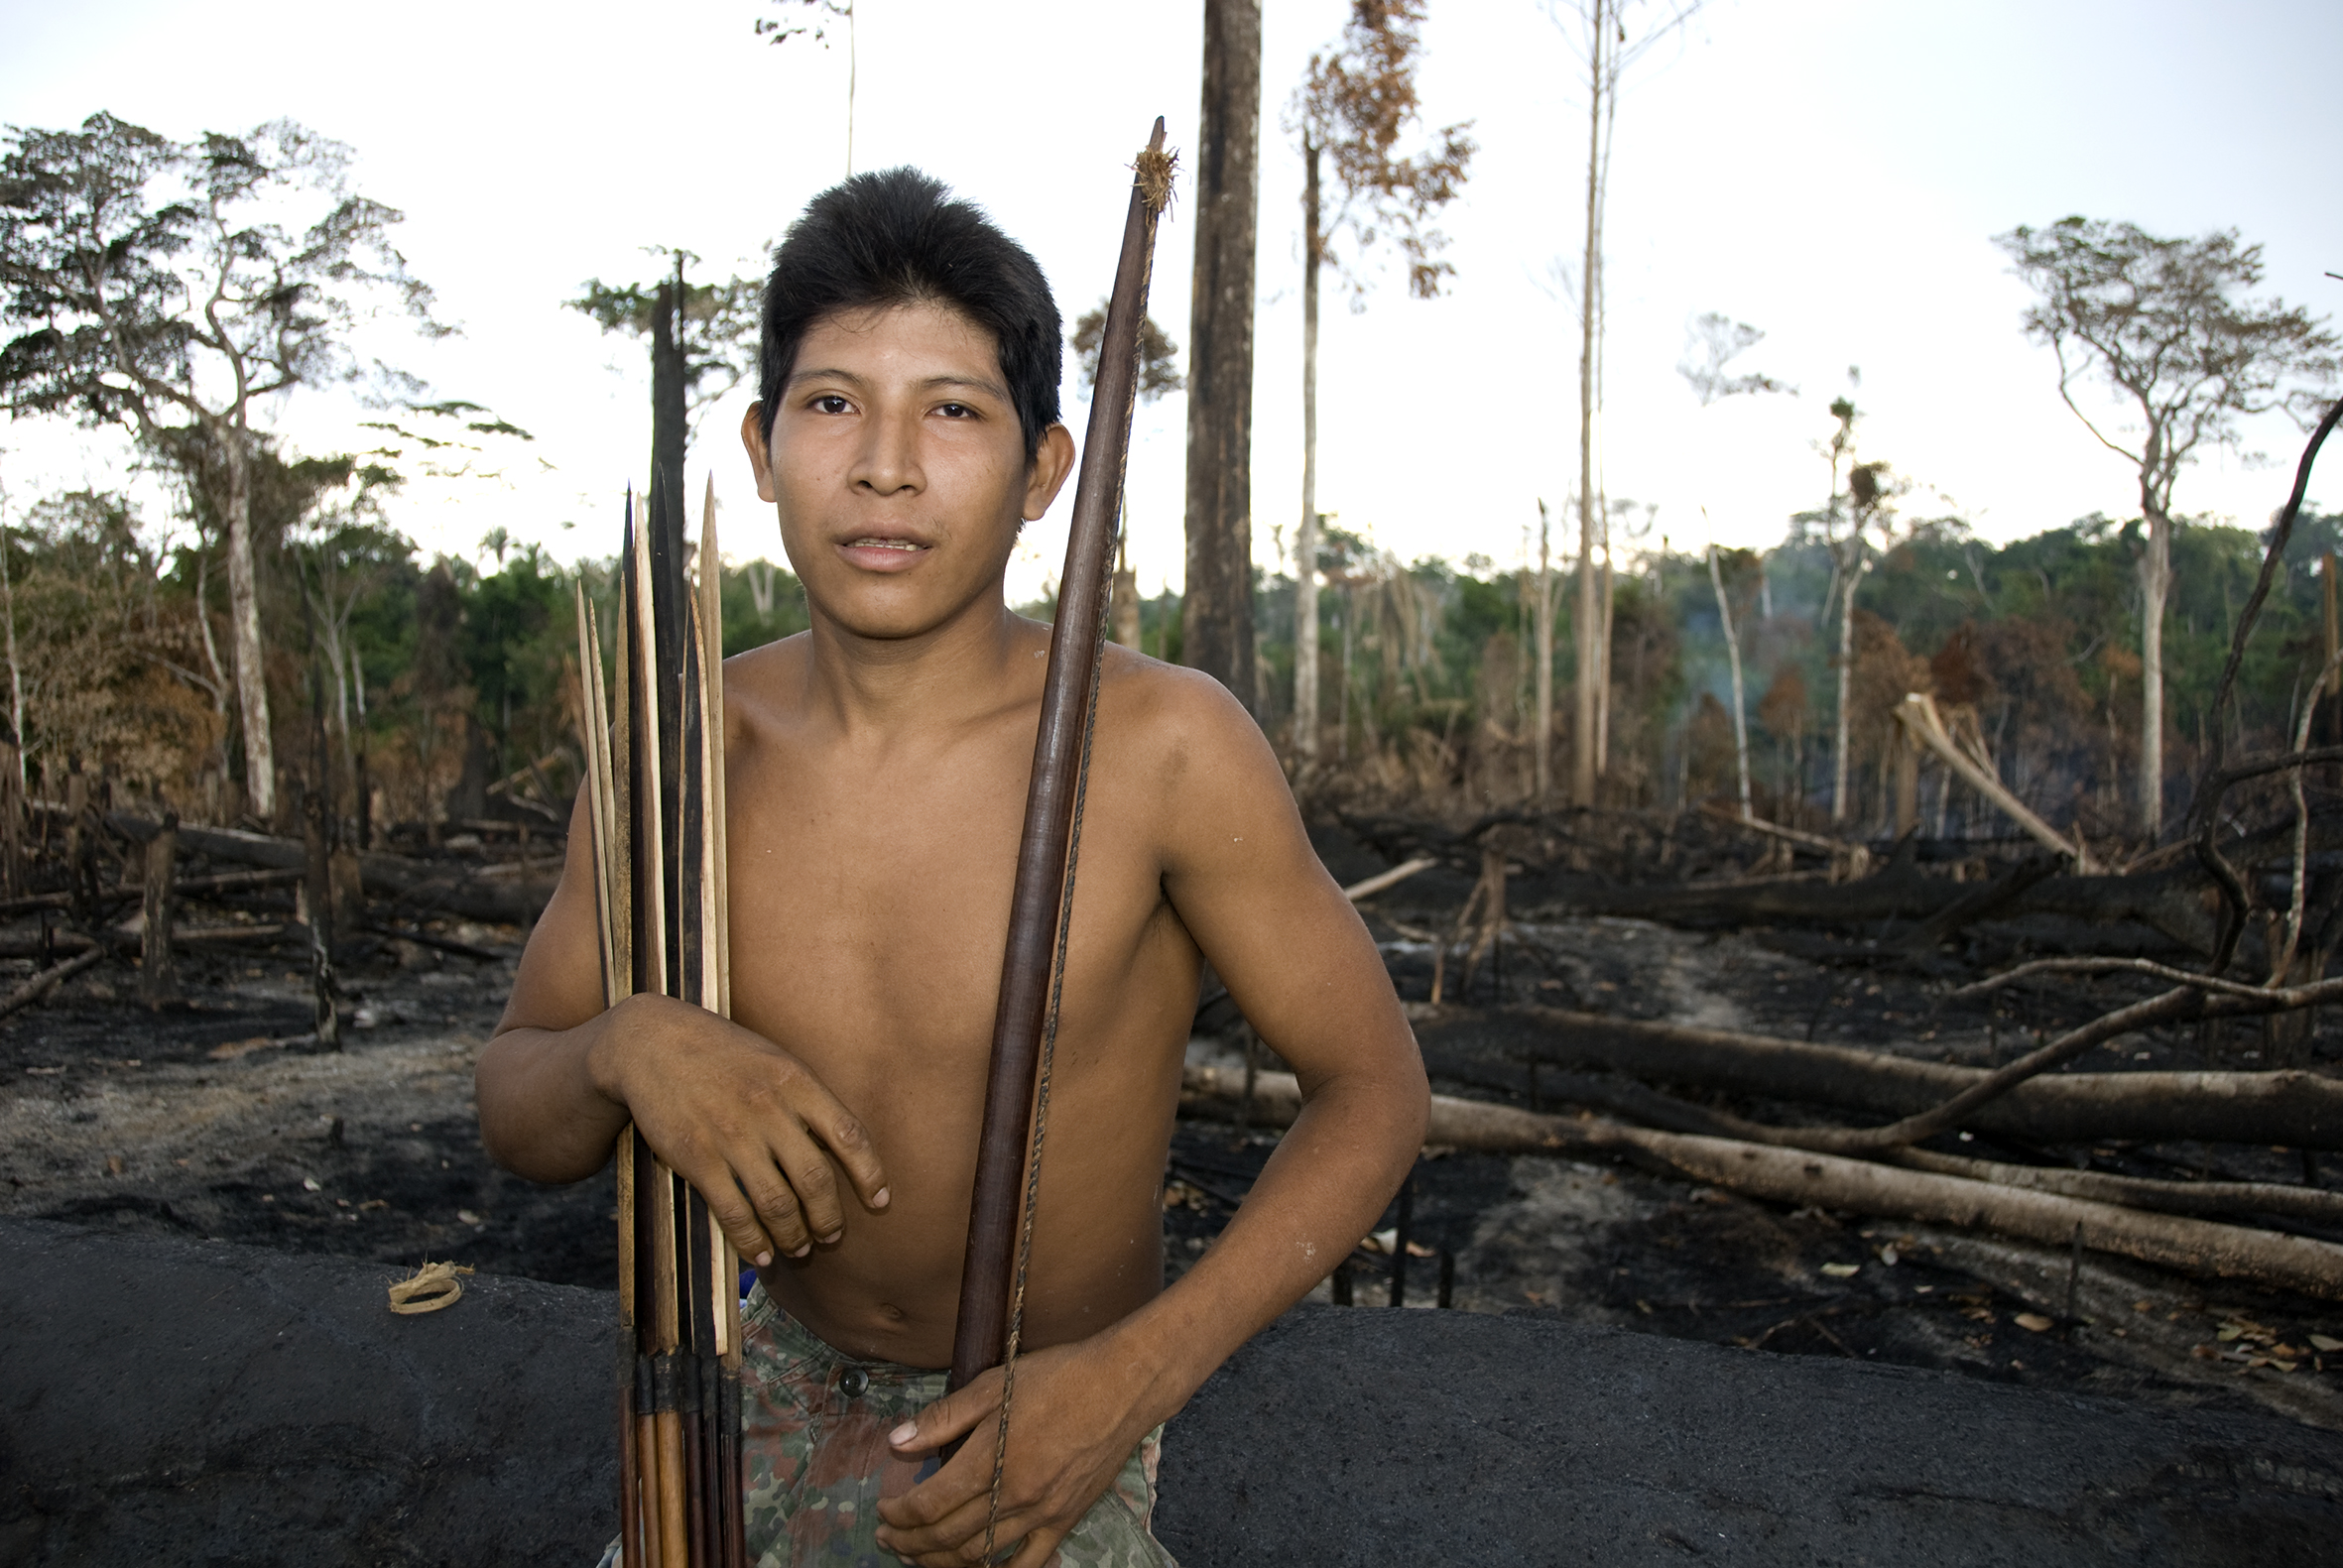 As the Amazon burns, why aren’t we hearing from indigenous voices?